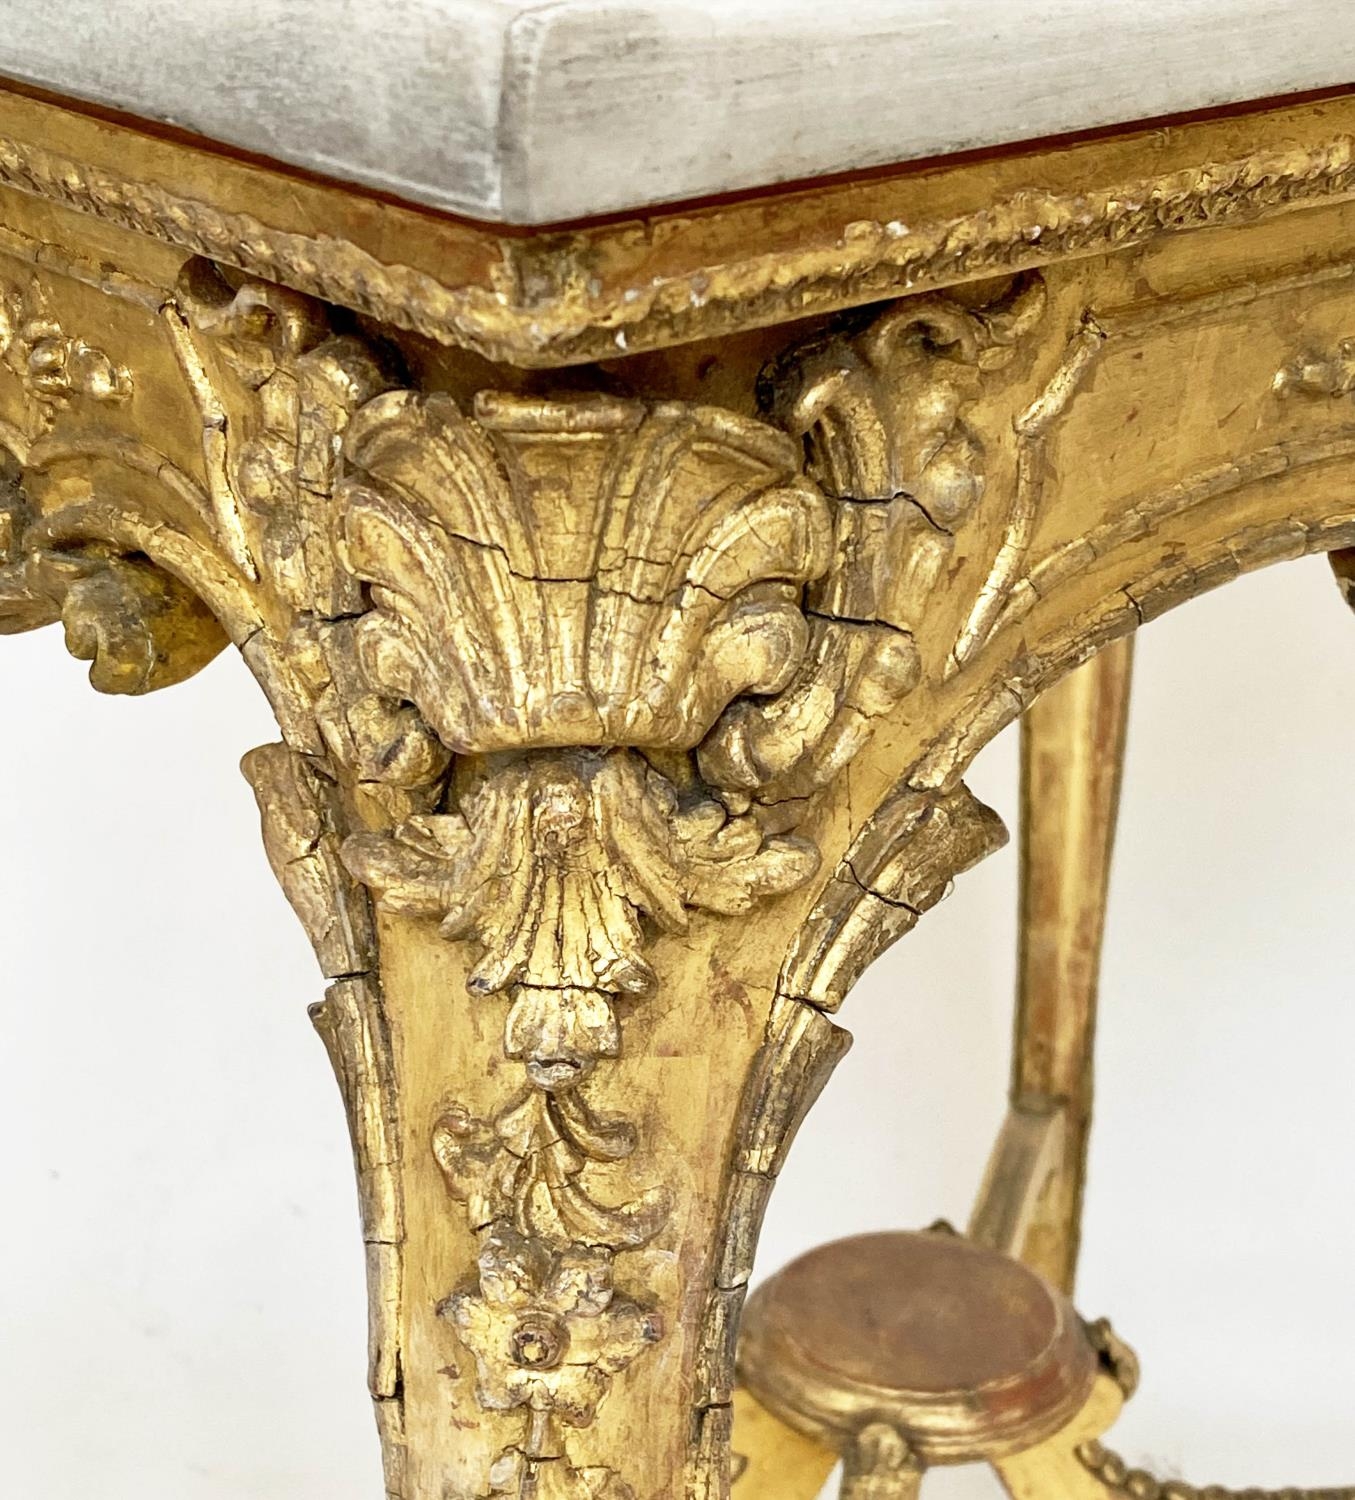 CENTRE TABLE, 19th century Italian, giltwood and gesso, with shell and C scroll decoration, marble - Image 5 of 11